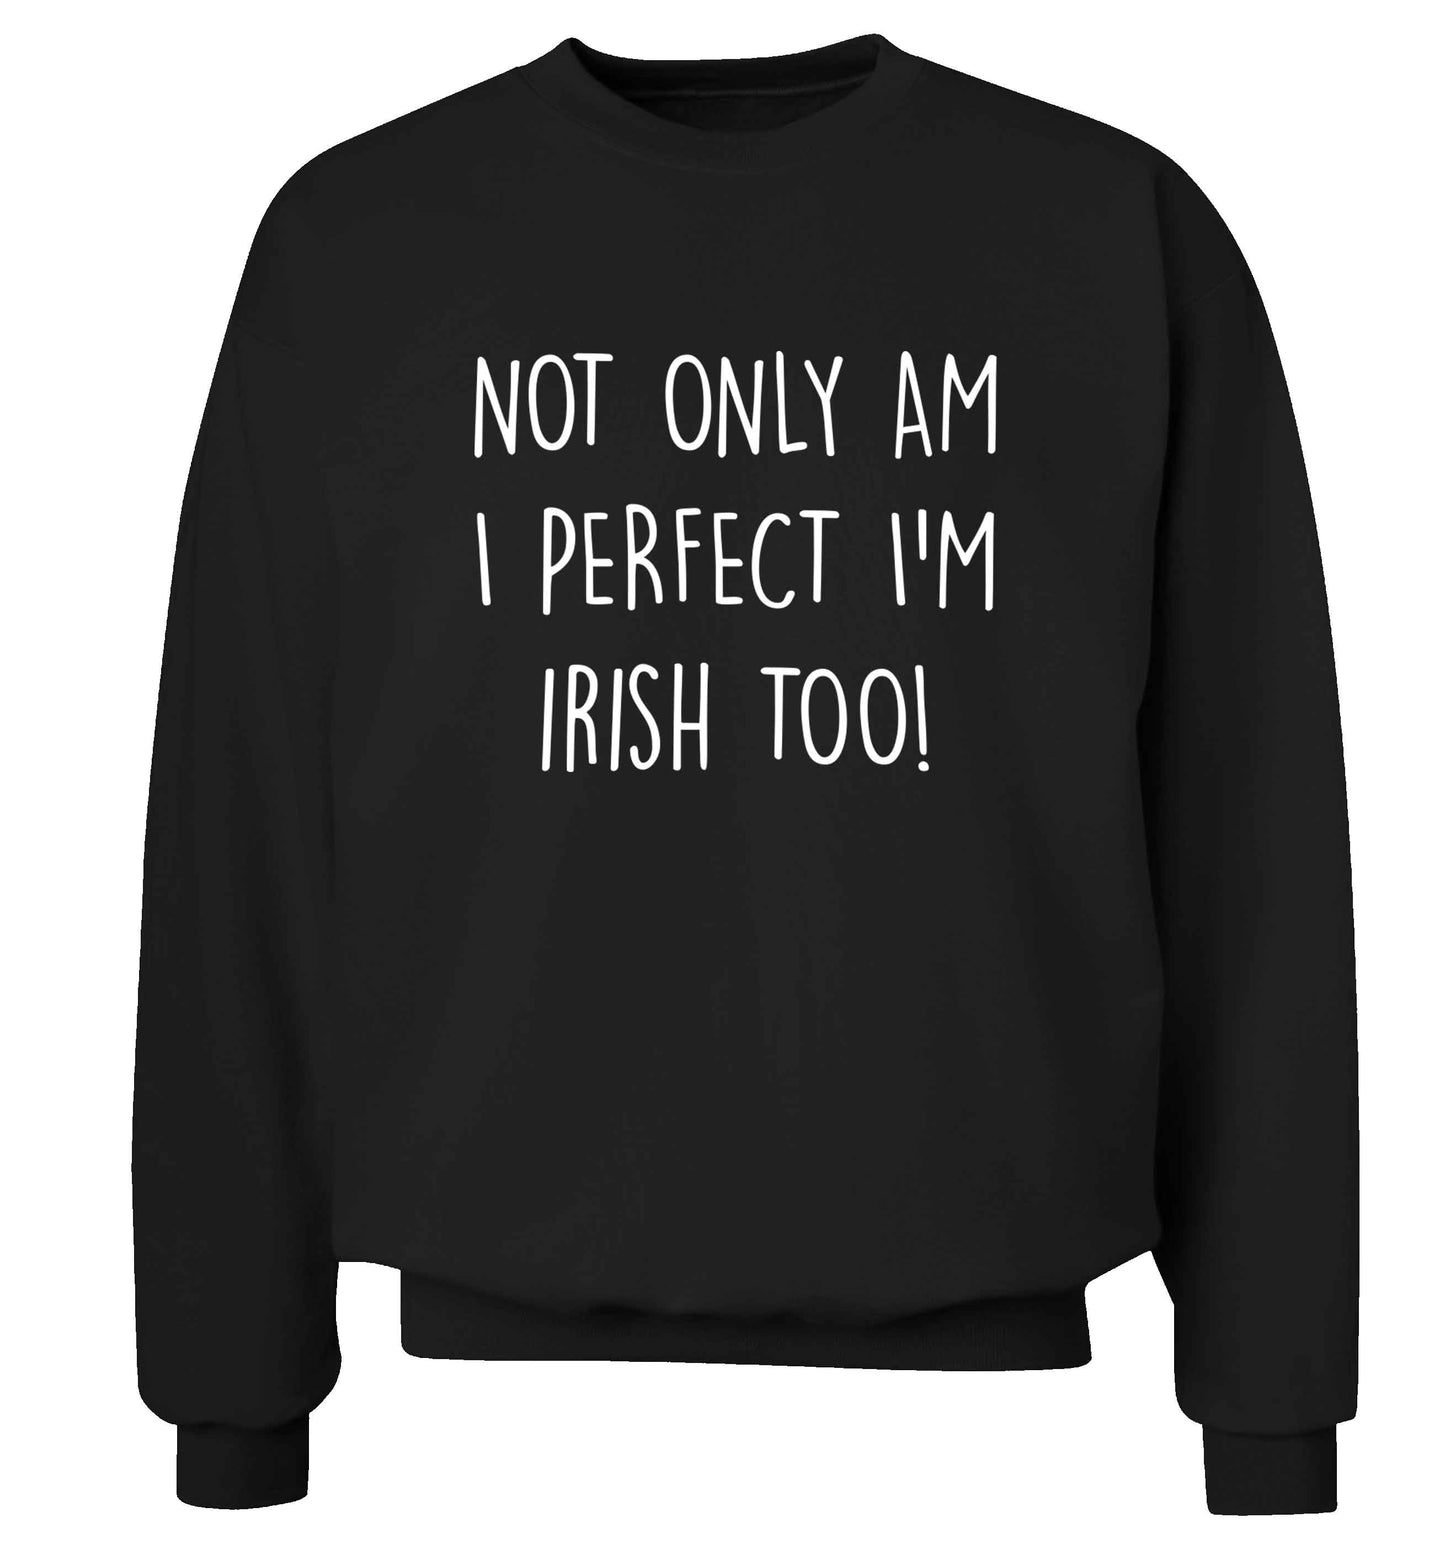 Not only am I perfect I'm Irish too! adult's unisex black sweater 2XL